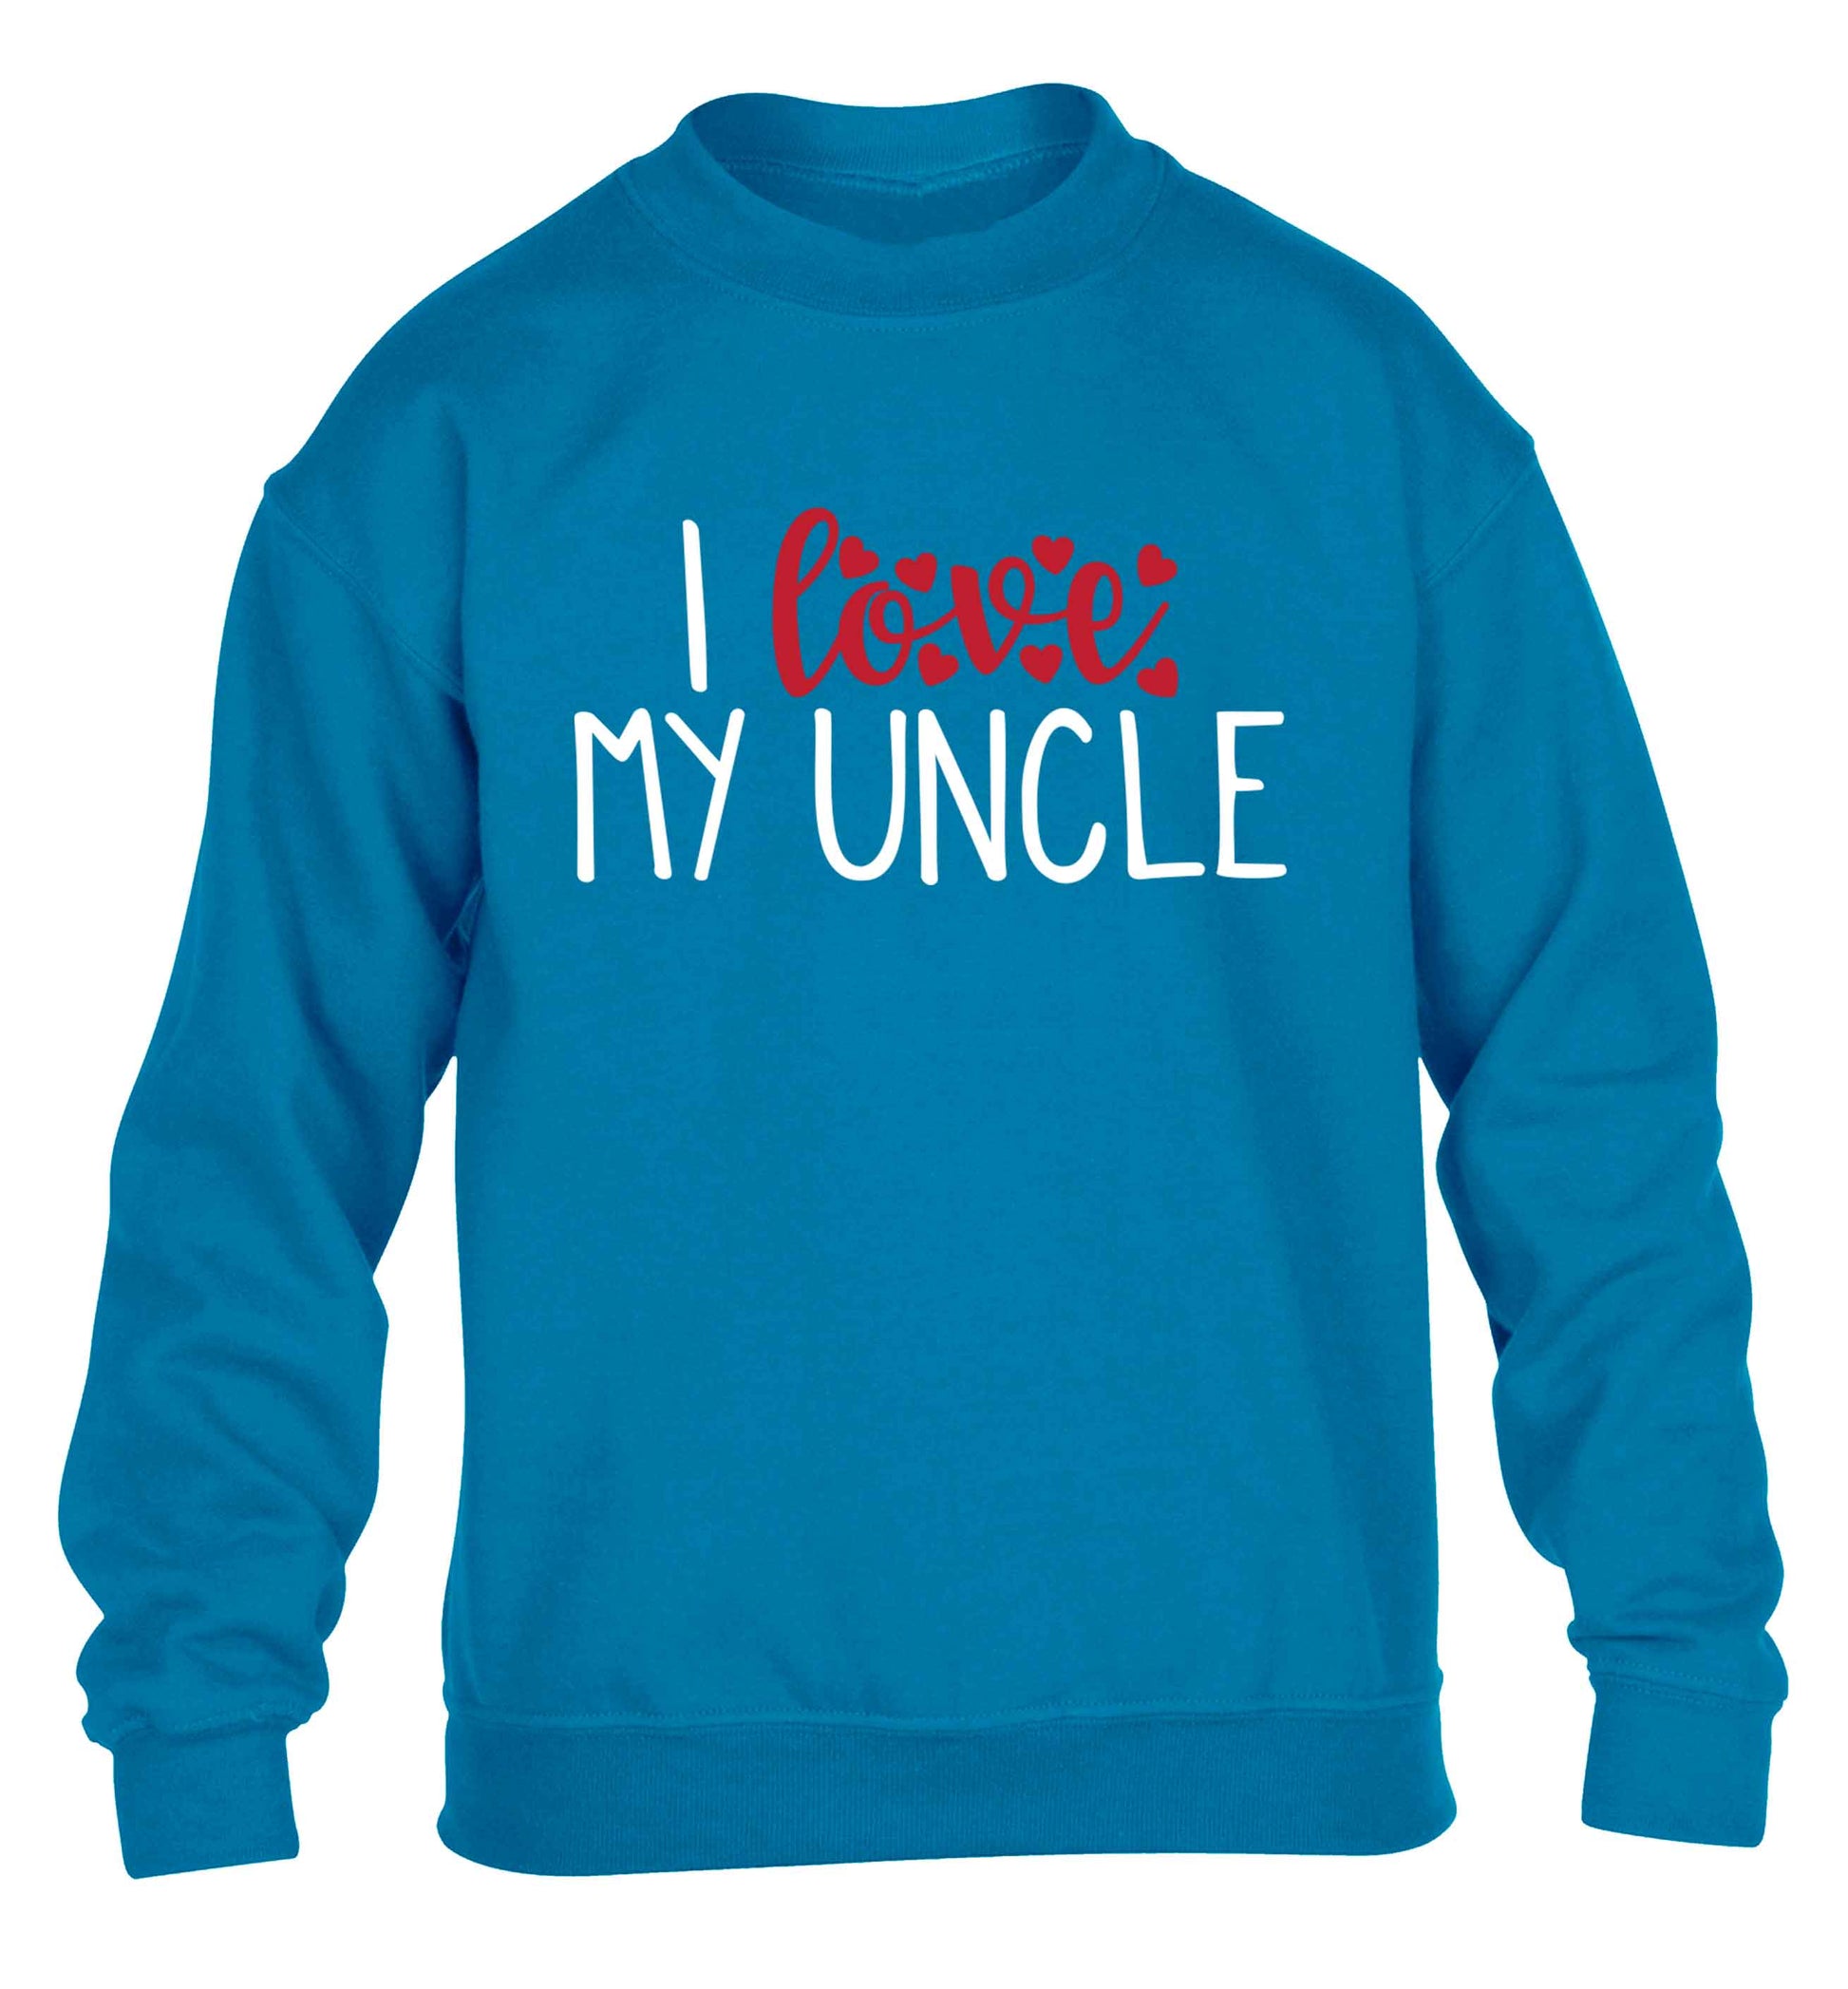 I love my uncle children's blue sweater 12-13 Years